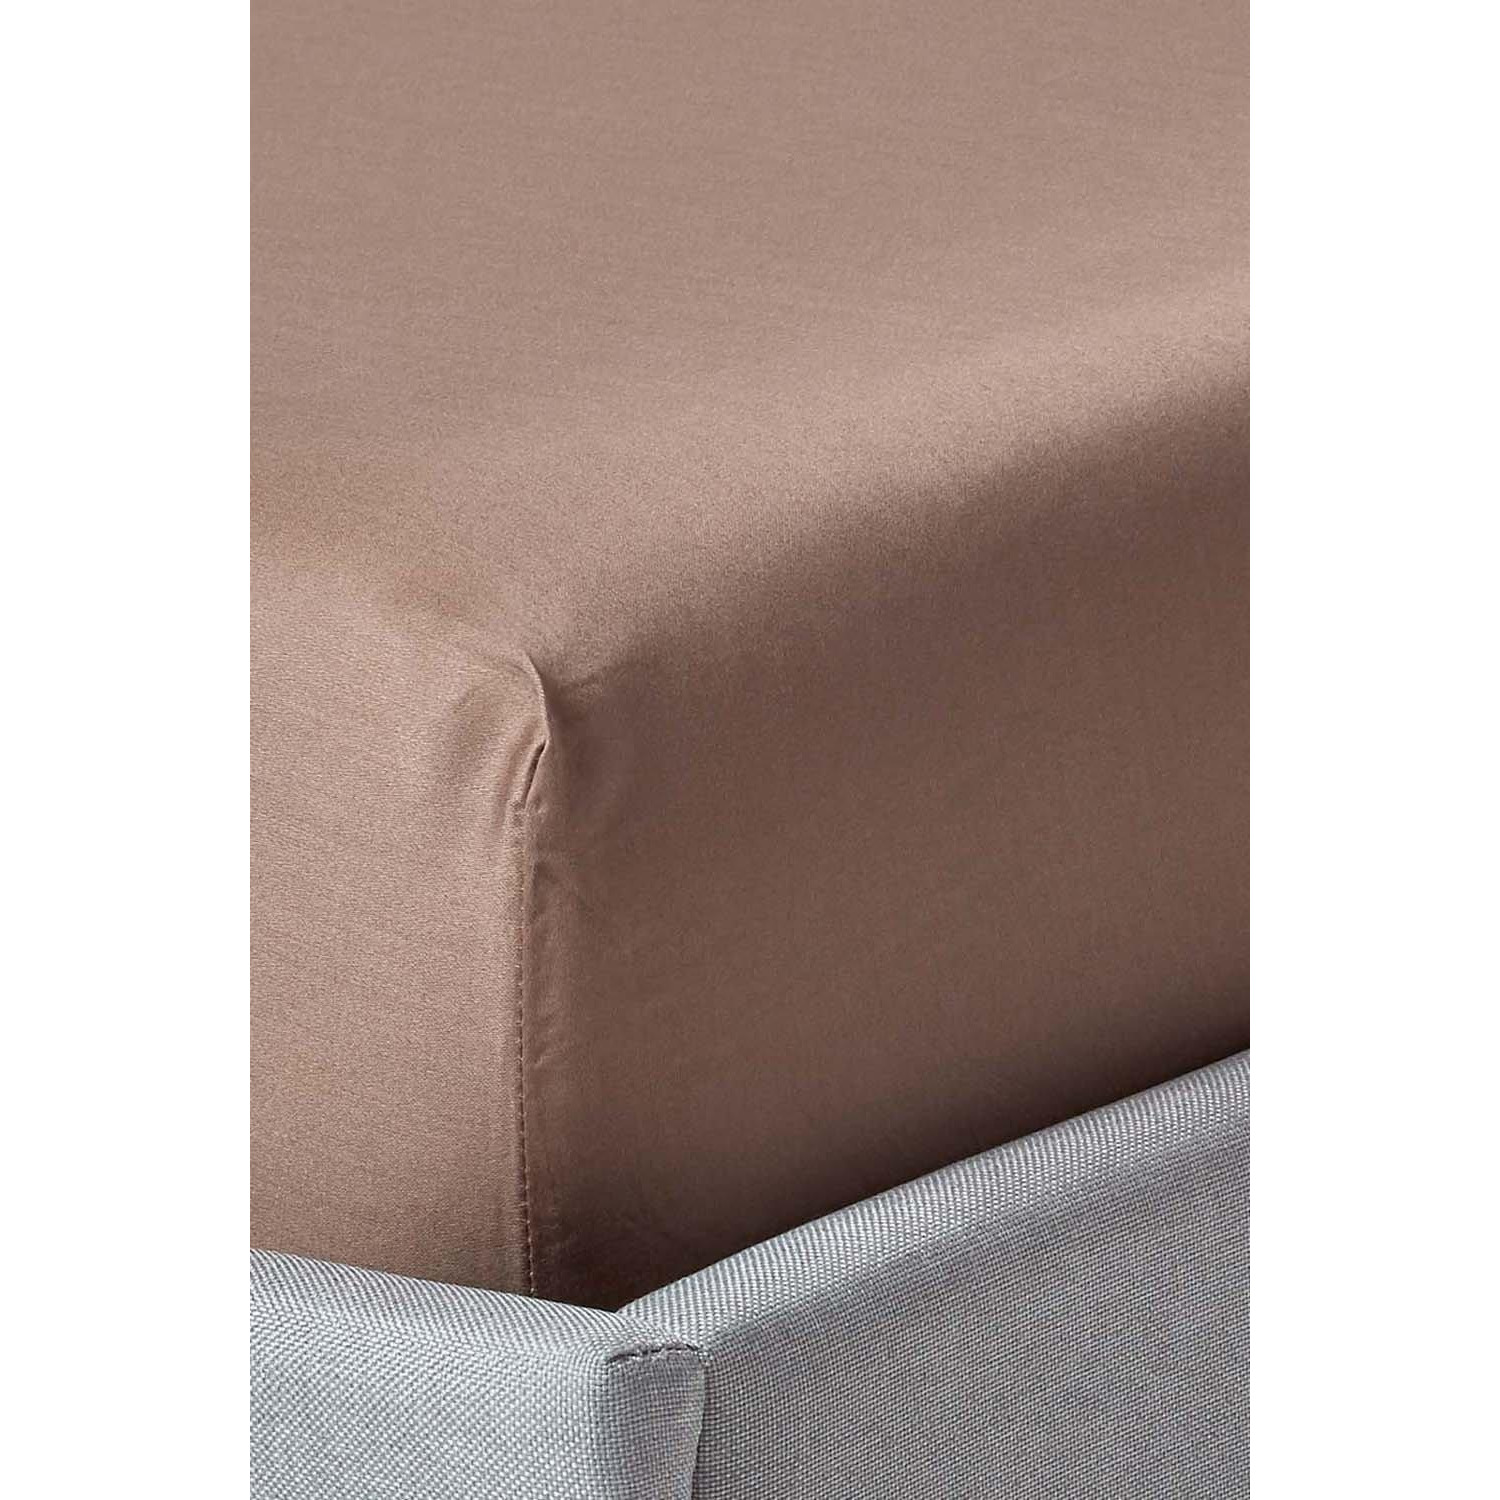 Organic Cotton Fitted Sheet 12 inch 400 Thread Count - image 1